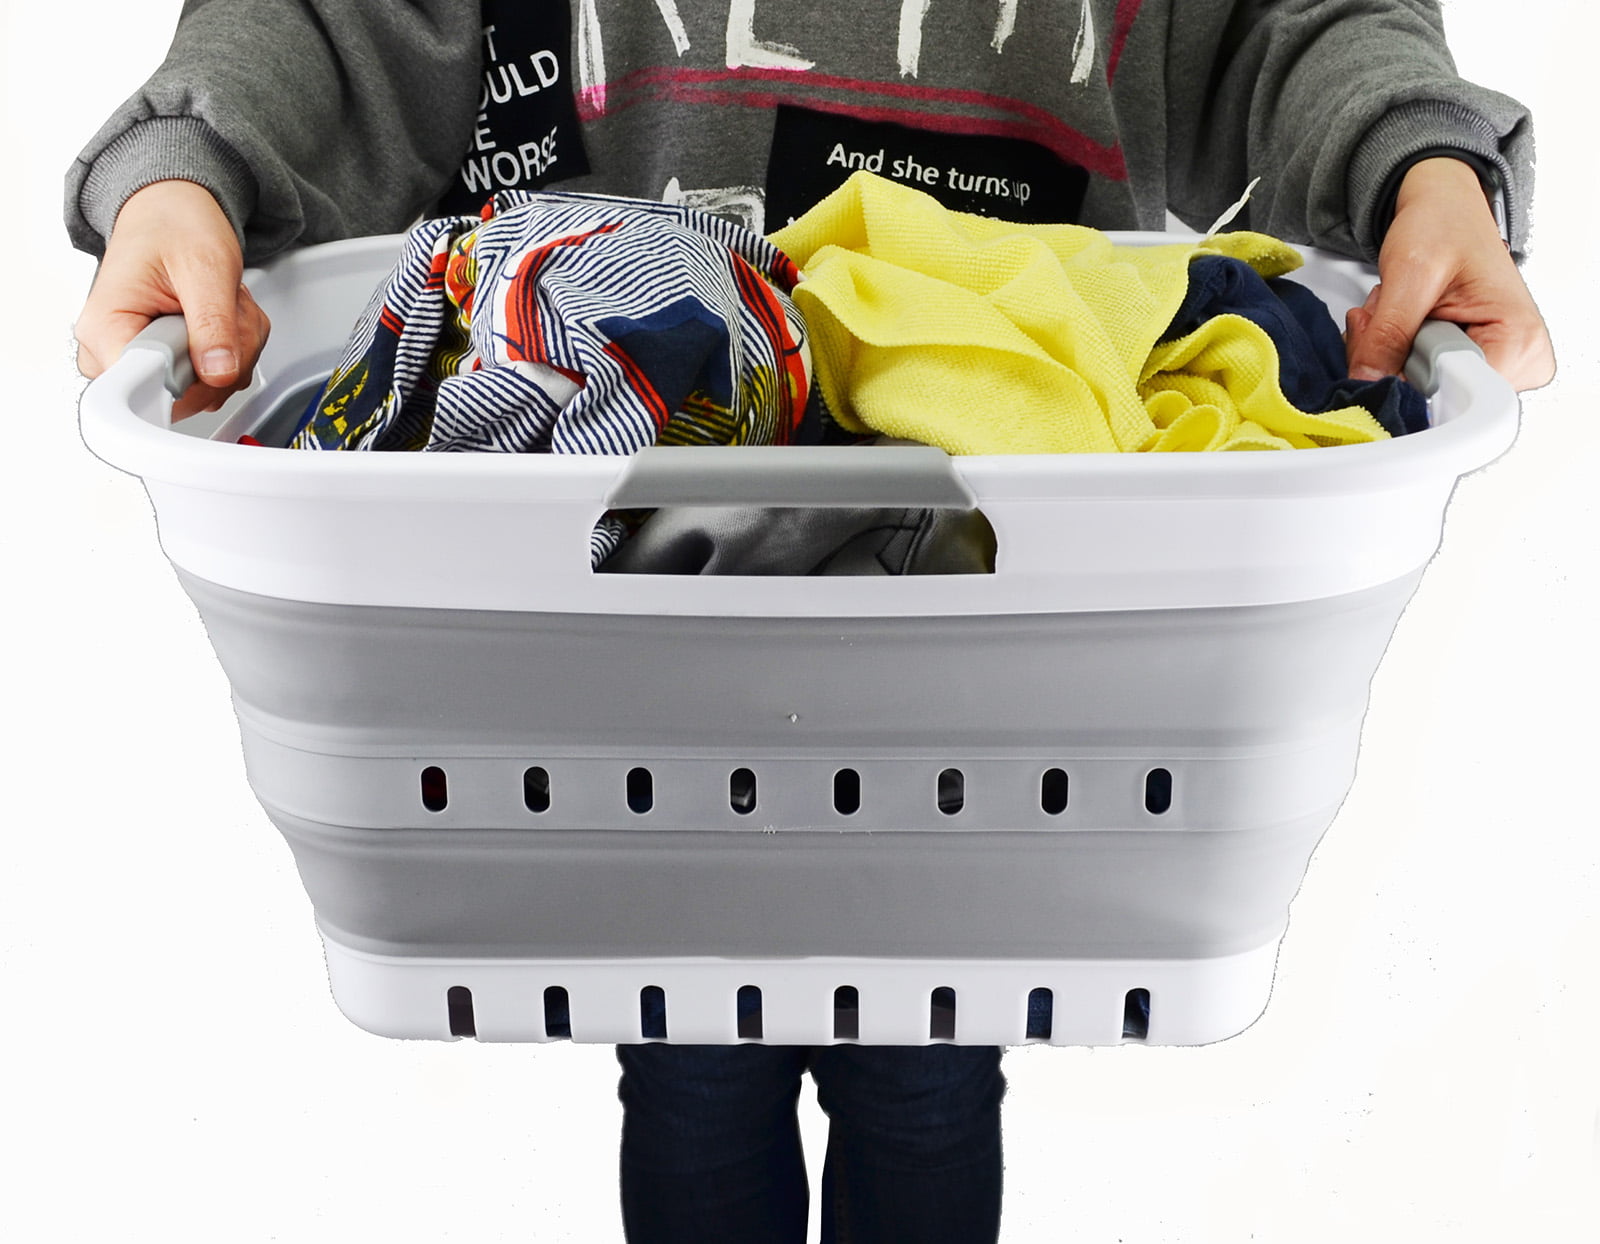 Space saving laundry basket is on sale for $8.99 until 12/5. LIKE